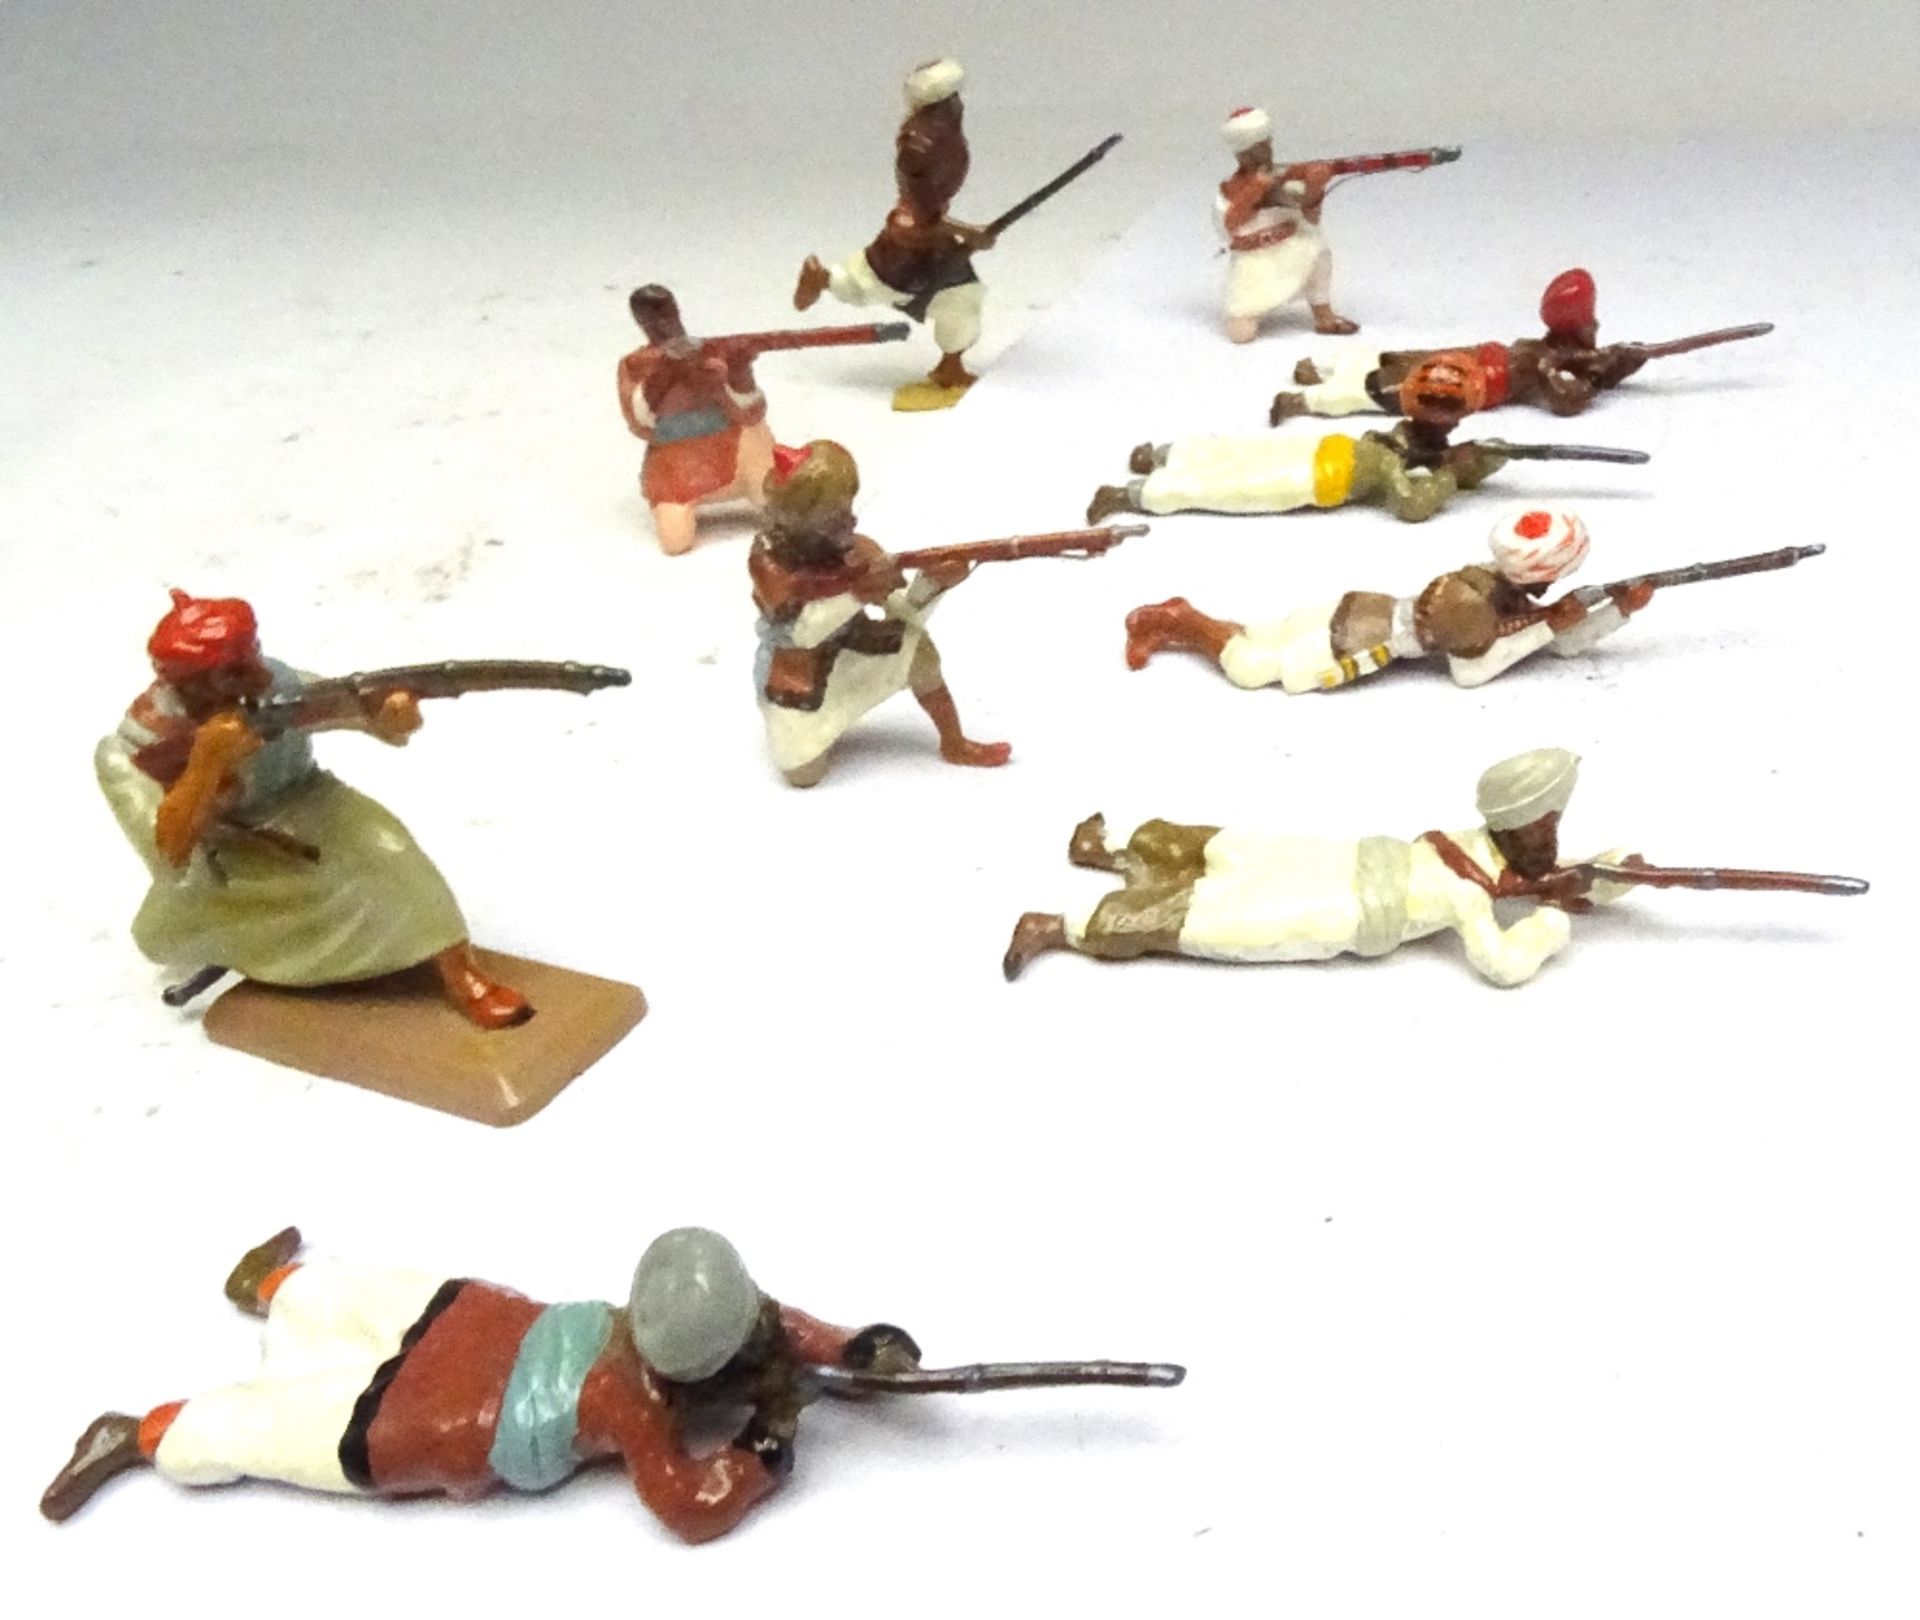 British Indian Army New Toy Soldiers with Maxim and Lewis Guns - Image 9 of 10